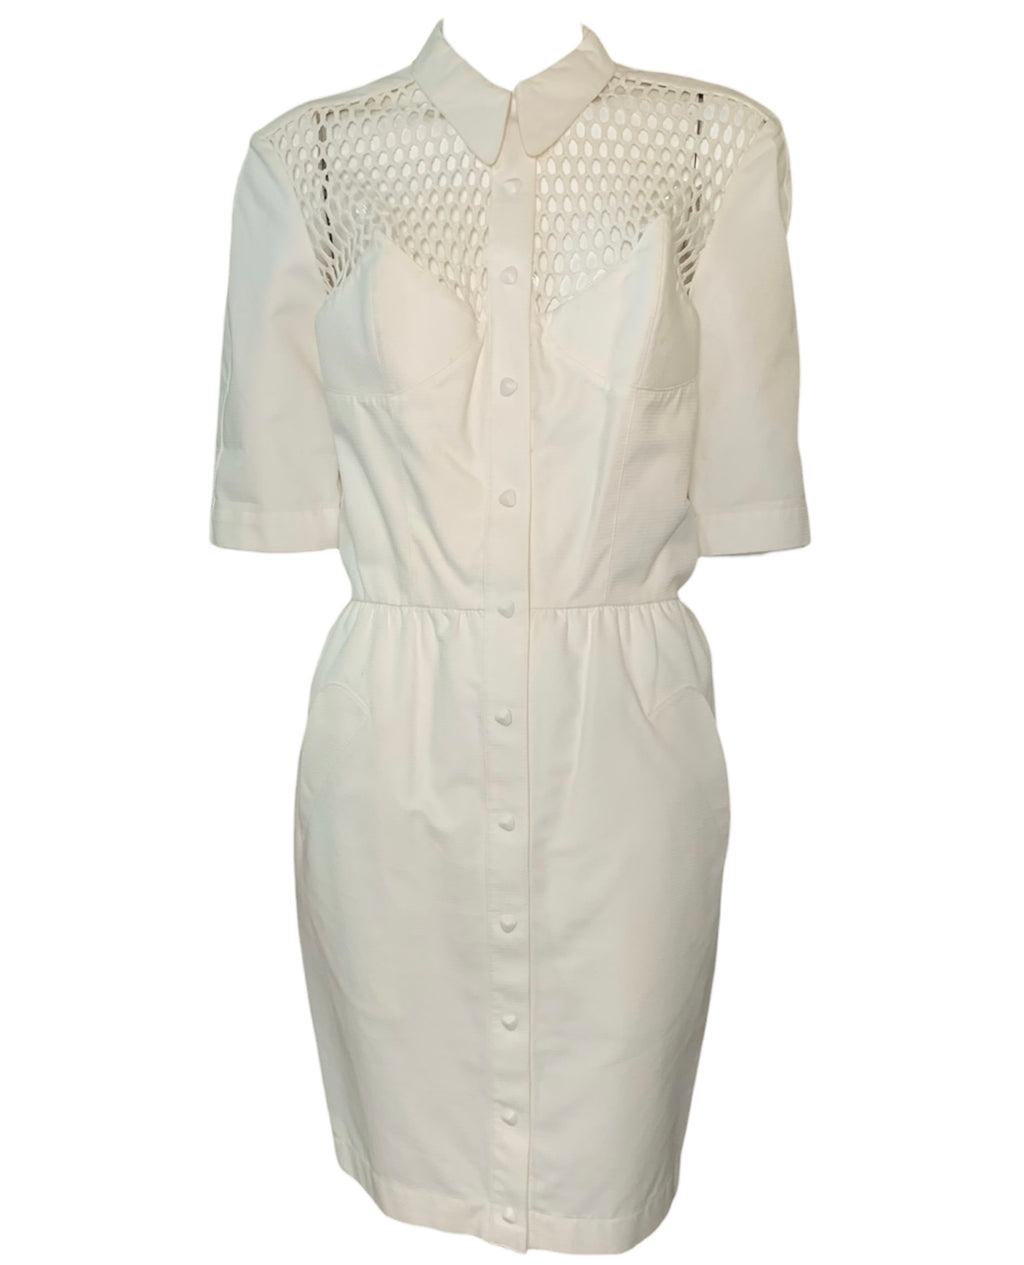 Thierry Mugler 90s White Pique Day Dress with Peekaboo Yoke. FRONT  1 of 5